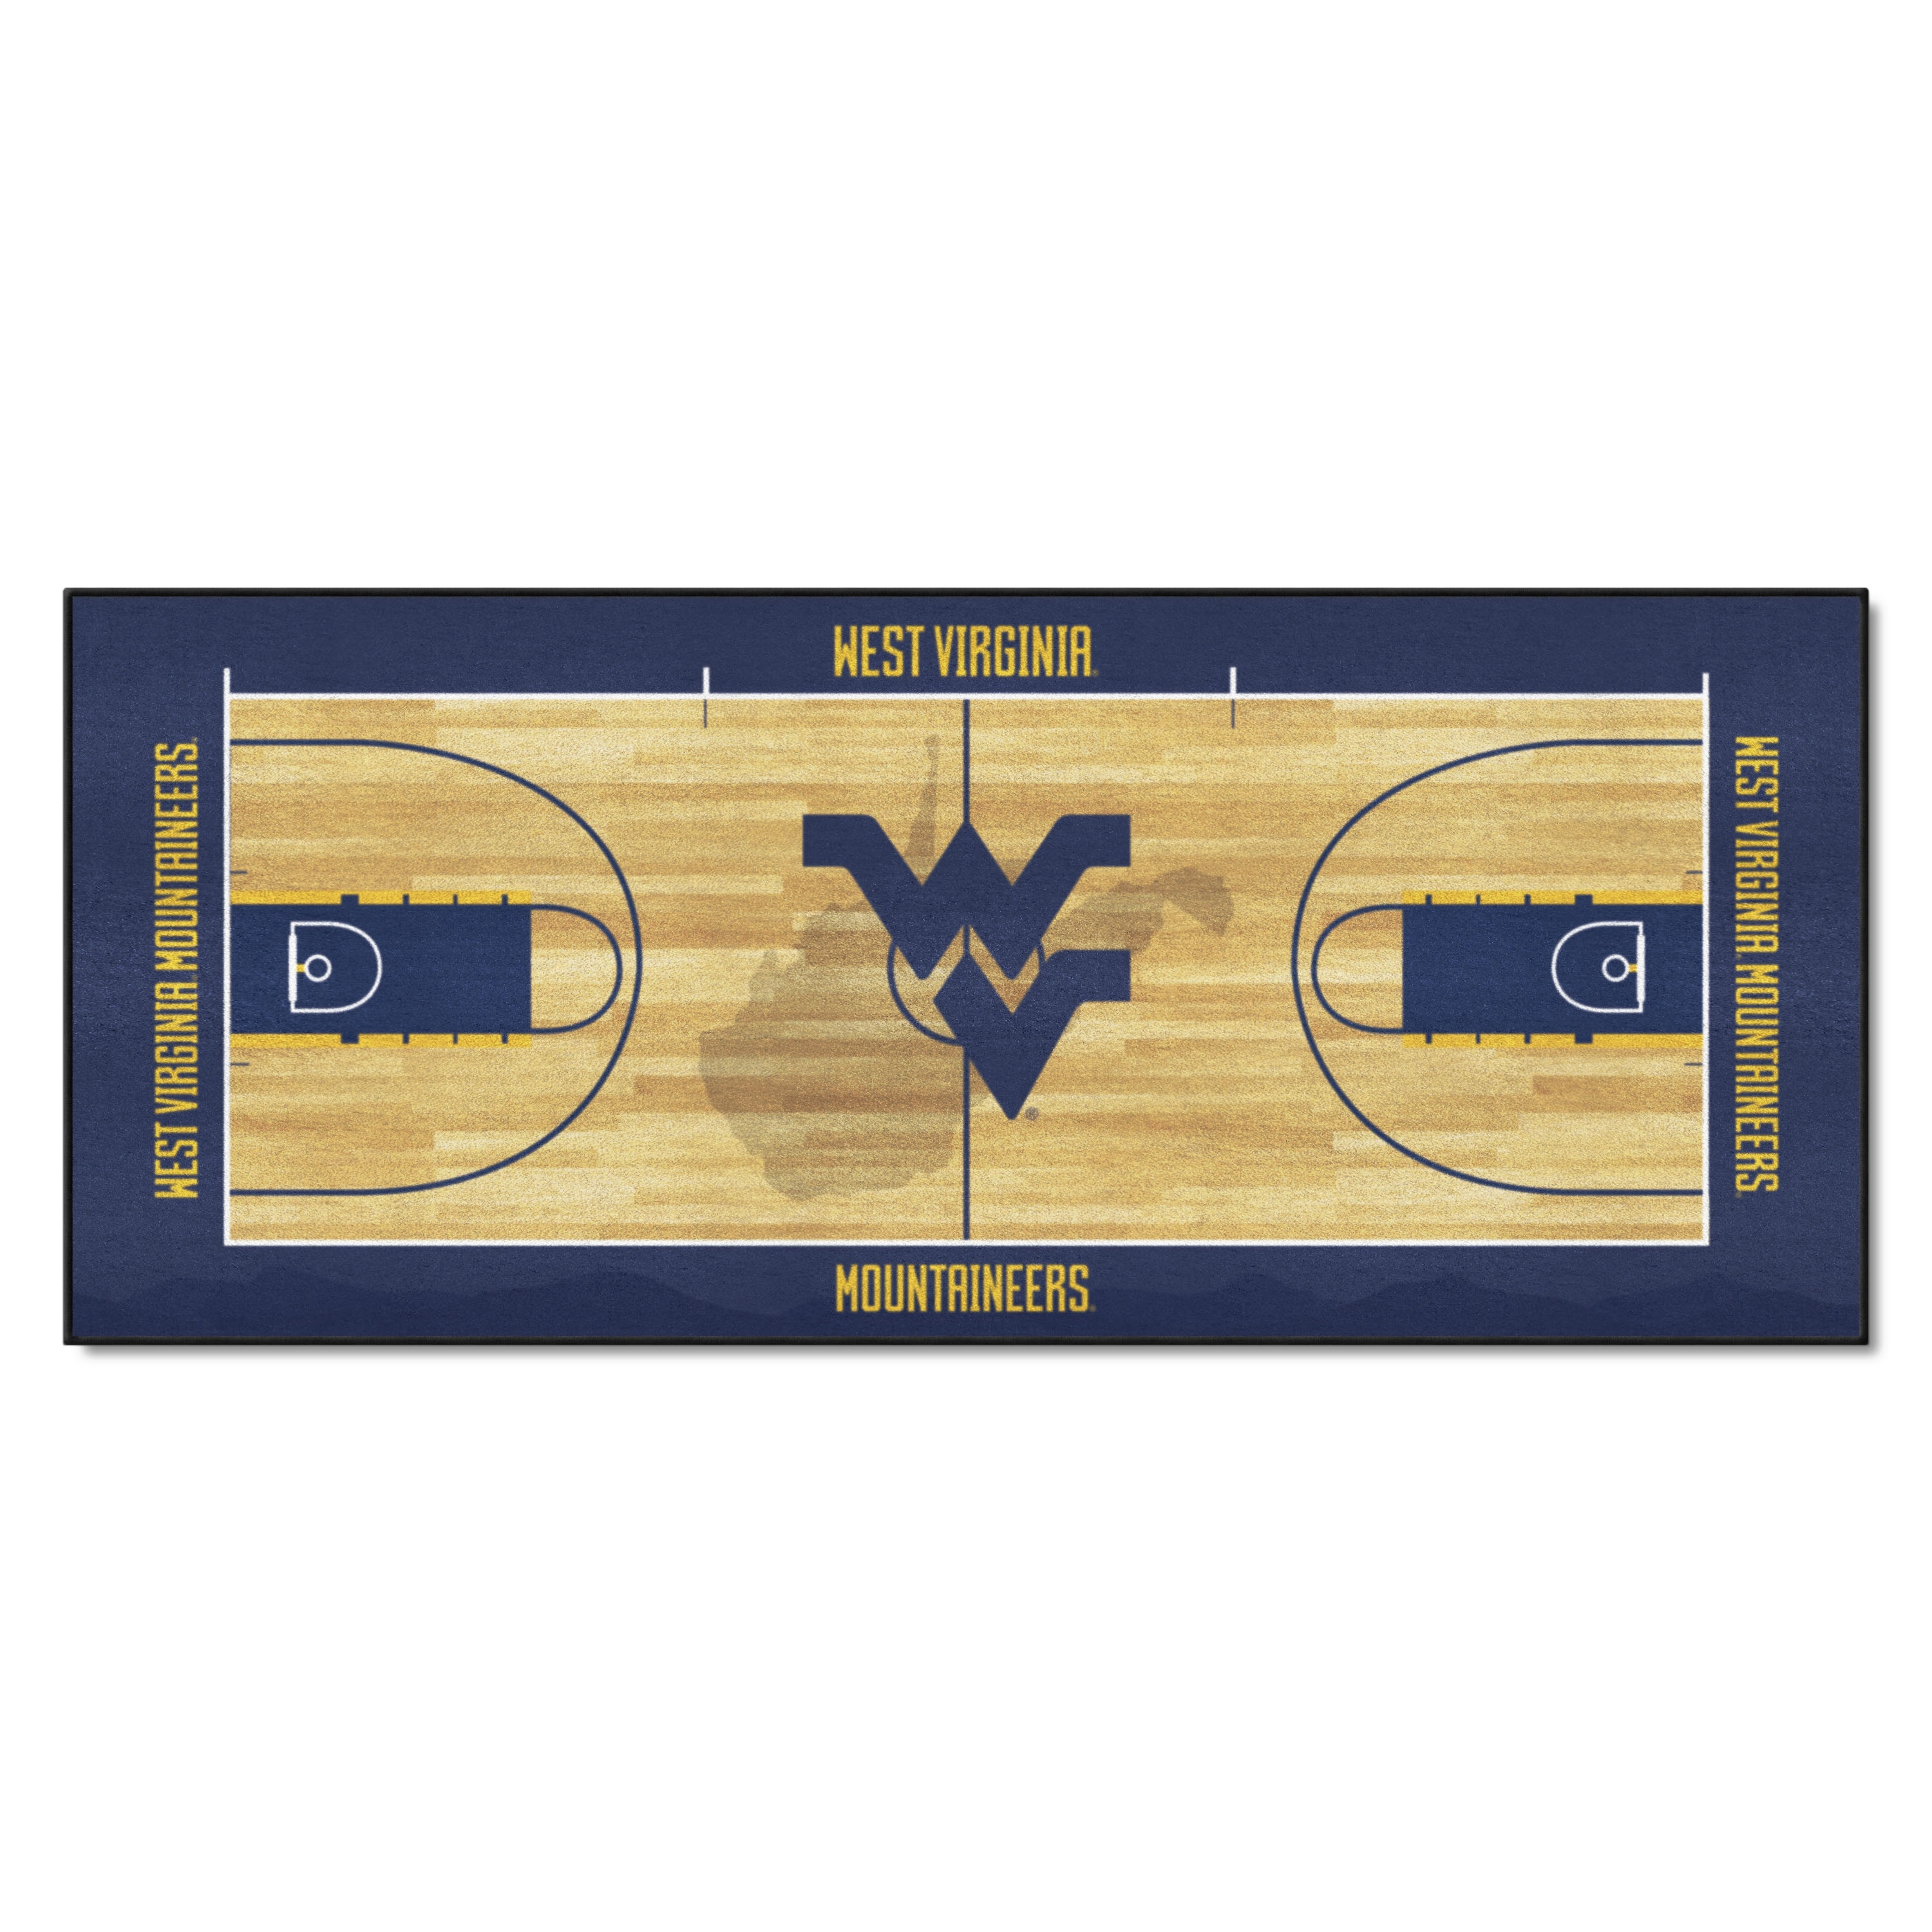 FANMATS NCAA West Virginia University Mountaineers Polyester Head Rest Cover 